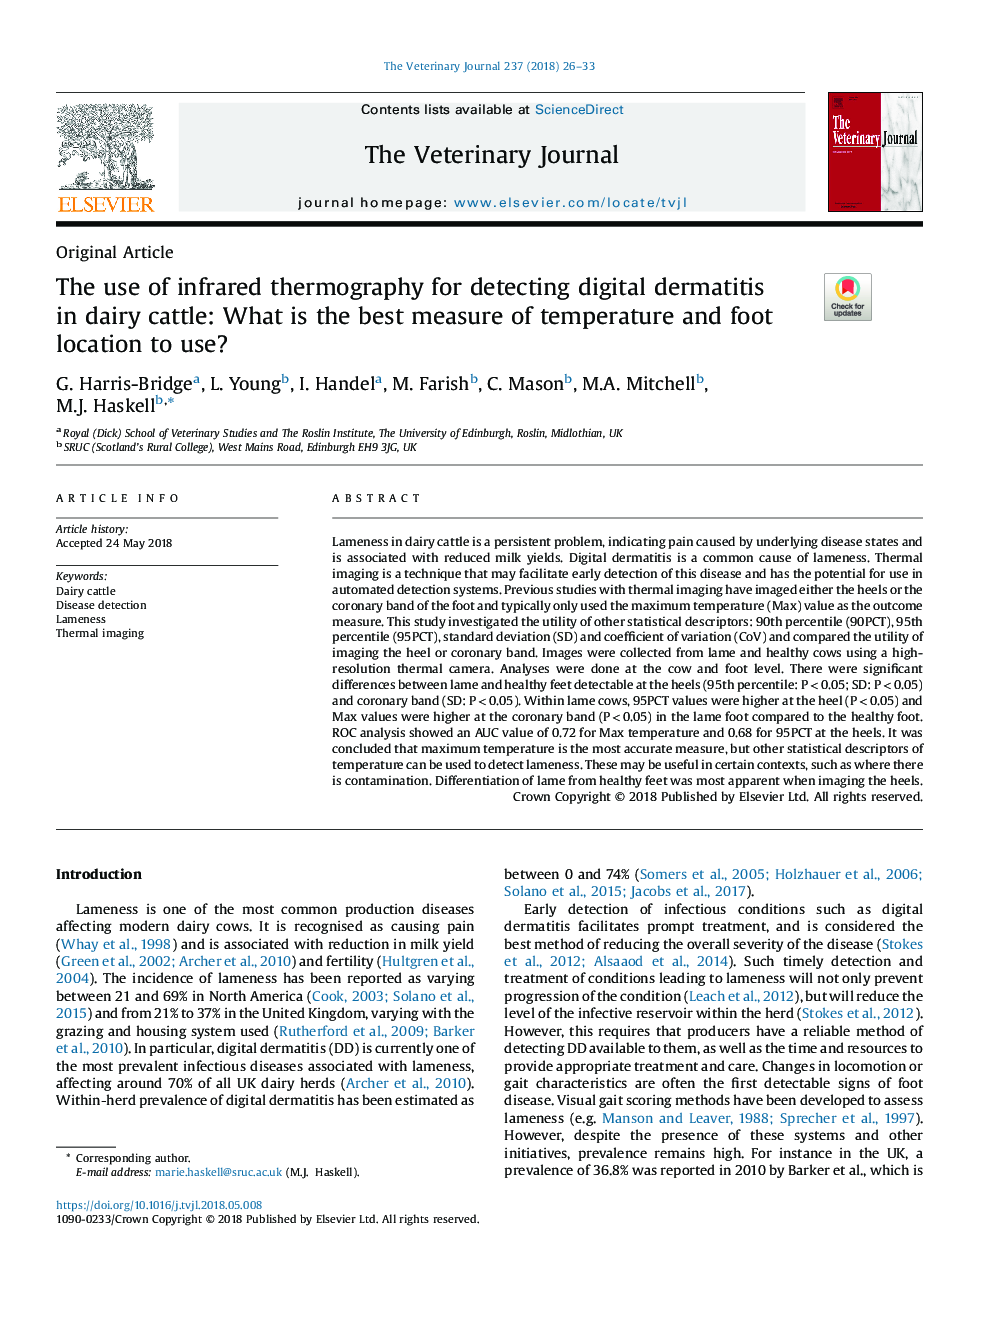 The use of infrared thermography for detecting digital dermatitis in dairy cattle: What is the best measure of temperature and foot location to use?